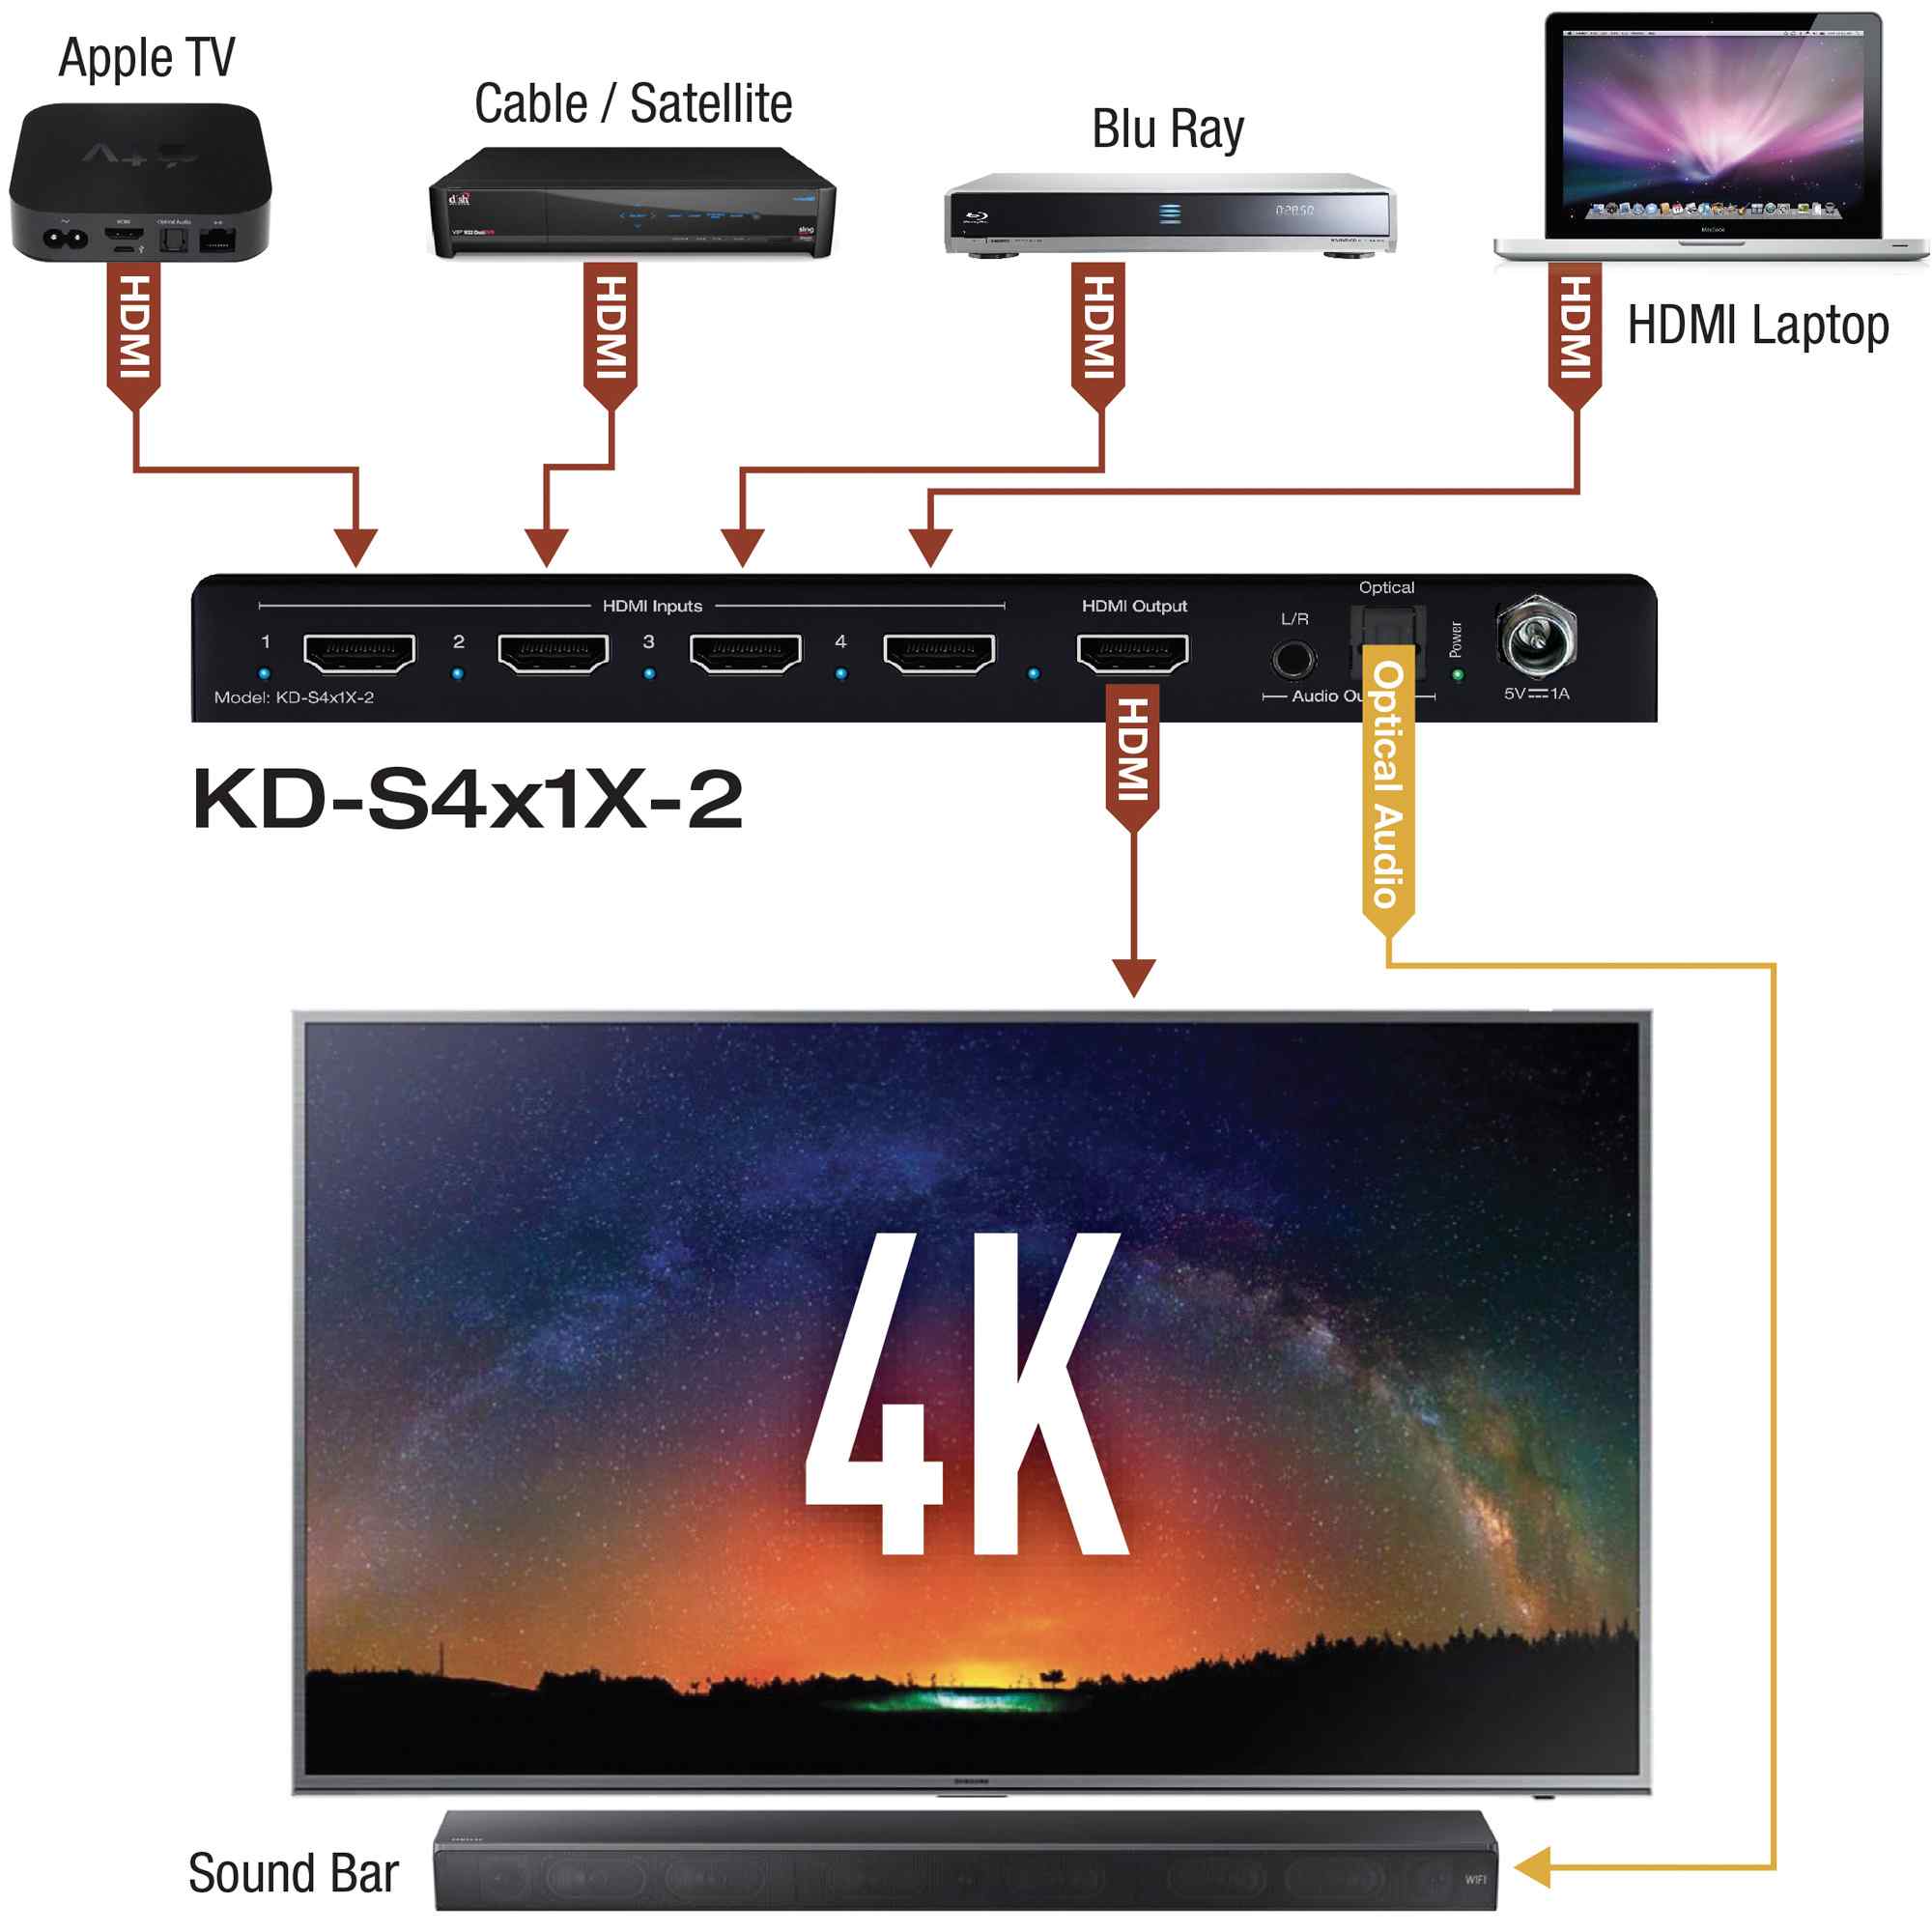 Thumbnail of Key Digital Example Diagram 4 port hdmi switch connected multiple devices